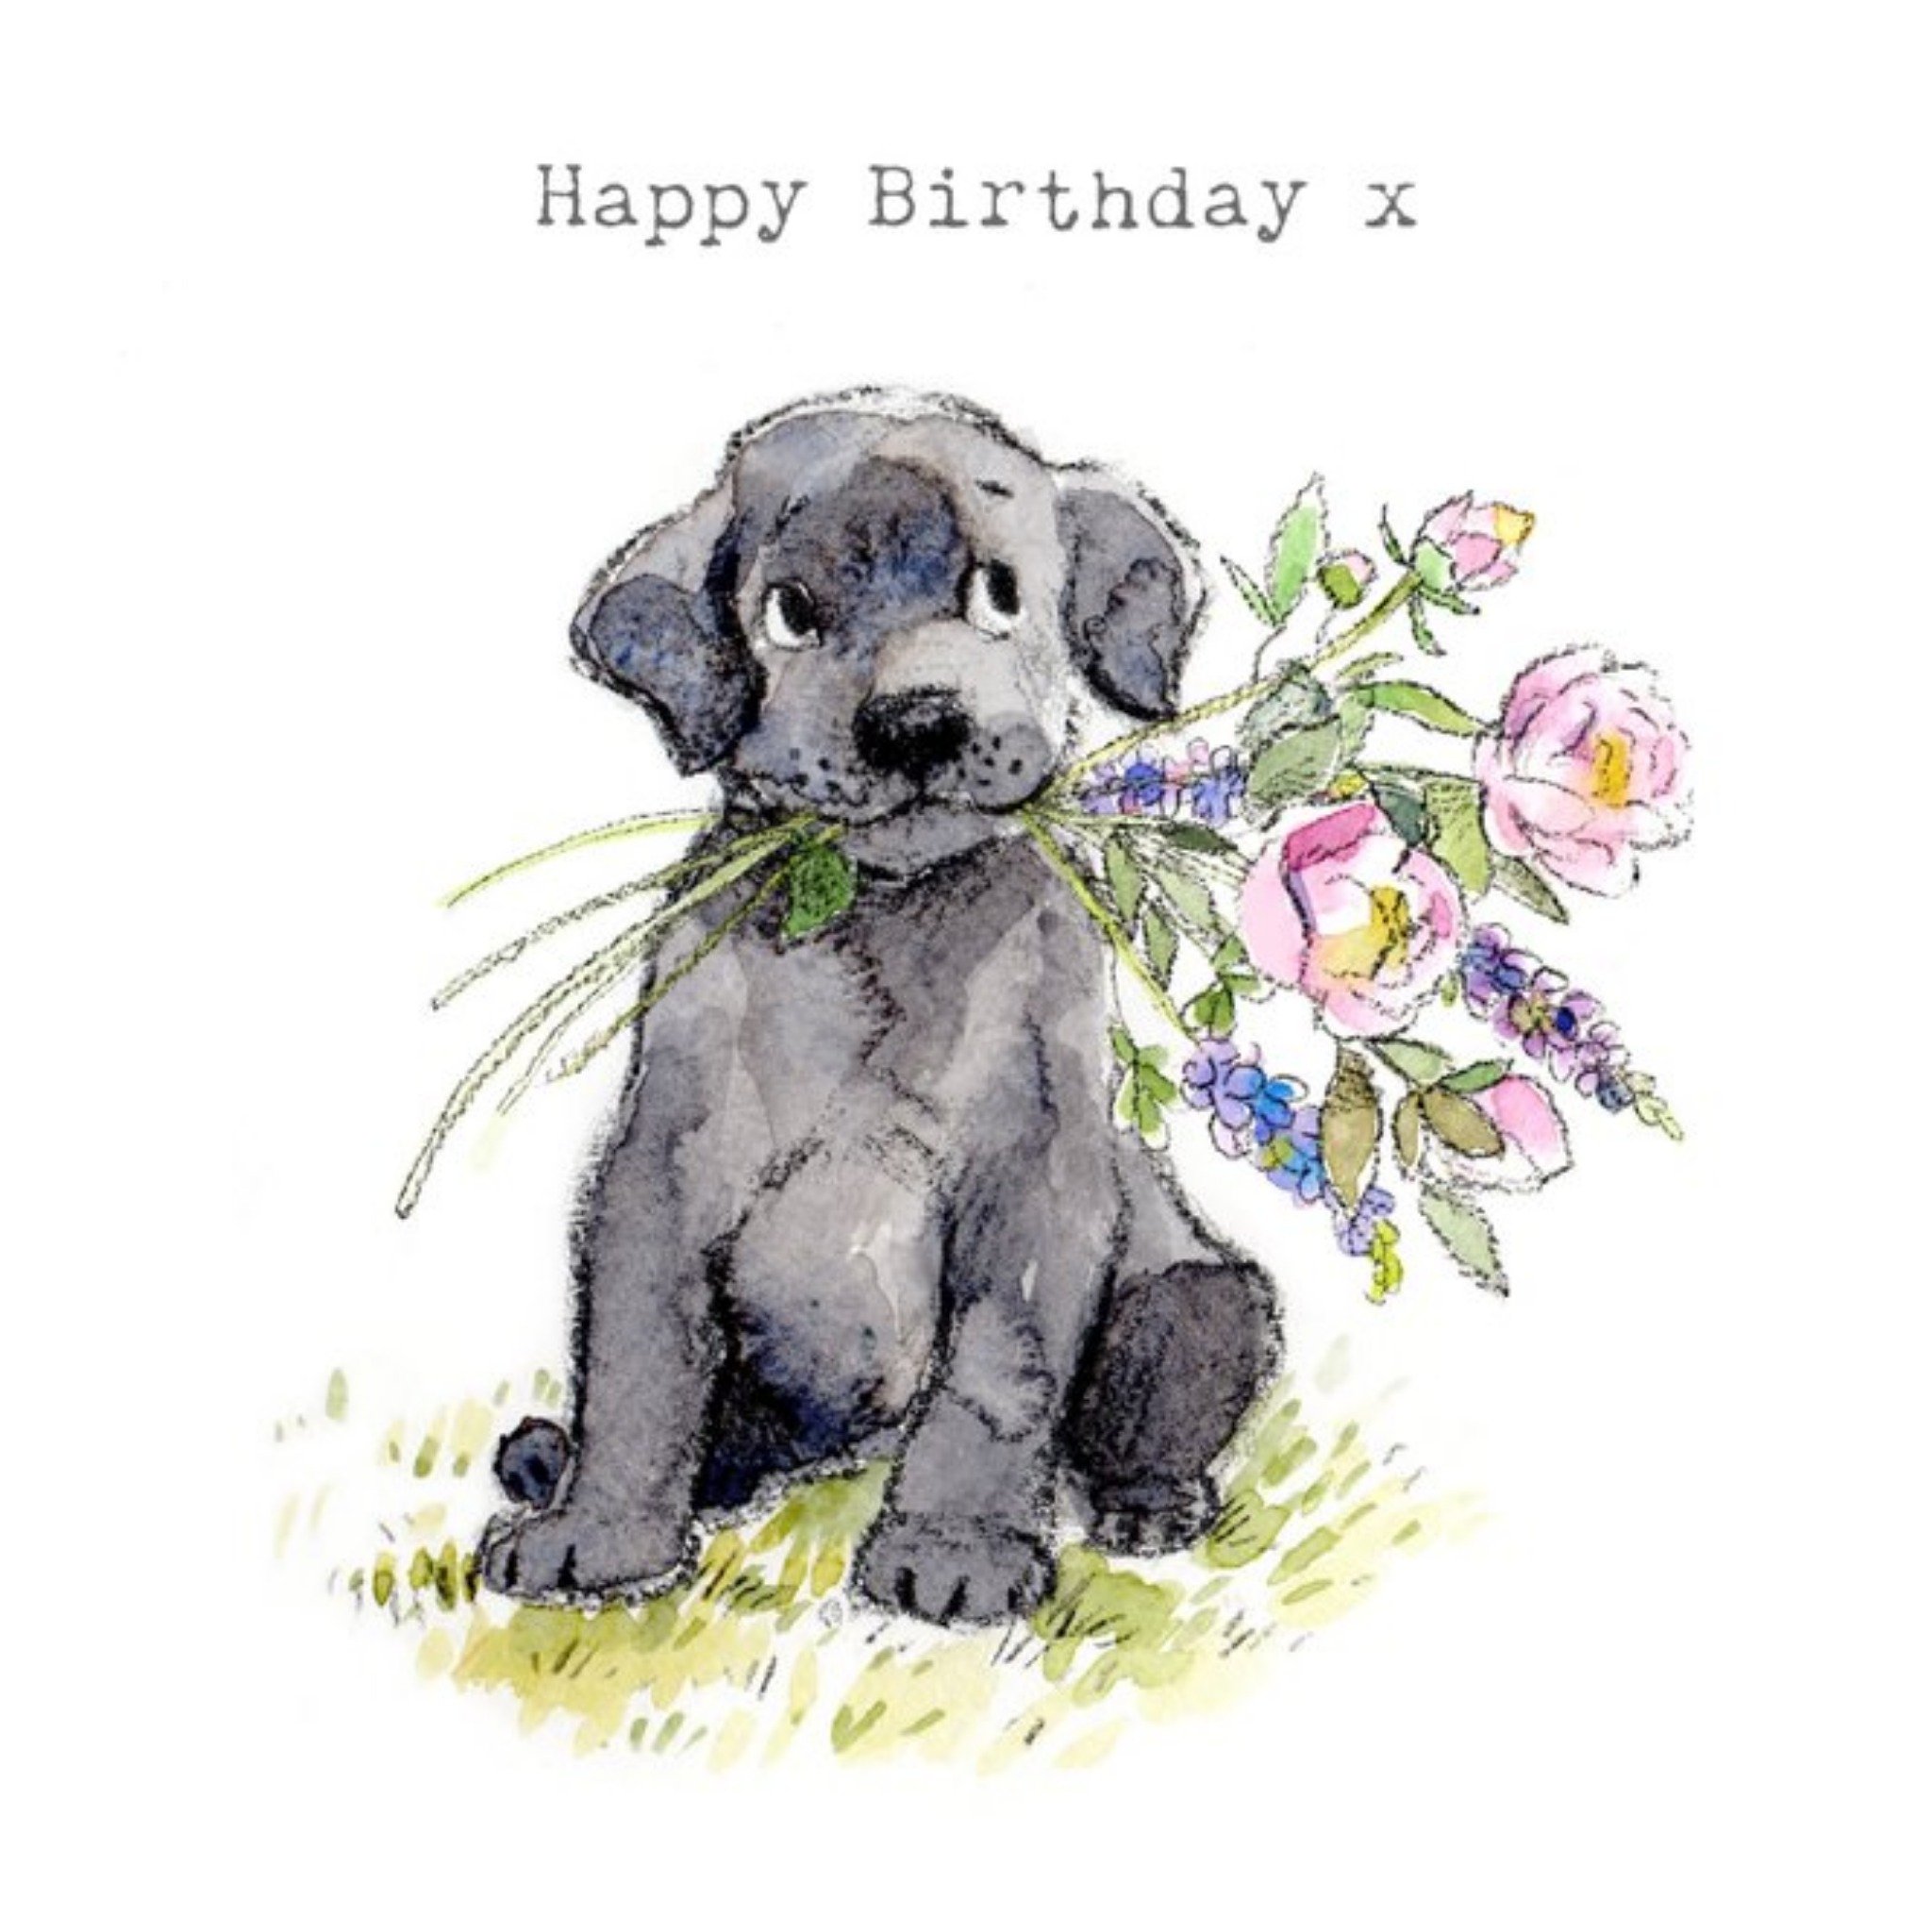 Moonpig Cute Illustrated Labrador Puppy With Flowers Birthday Card, Large